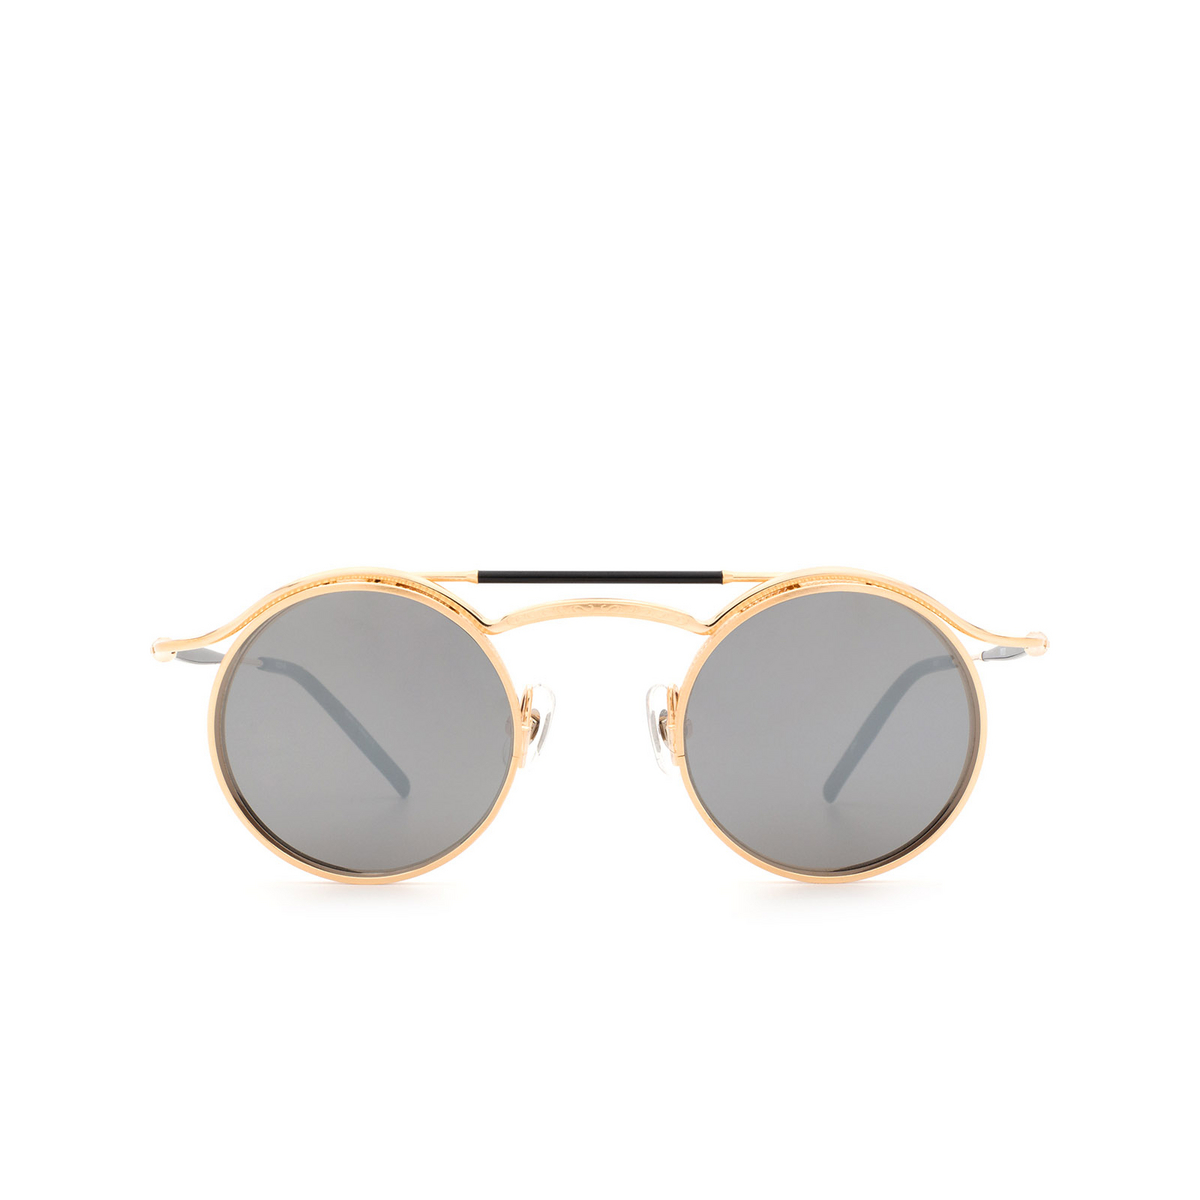 Matsuda® Round Sunglasses: 2903H color Brushed Rose Gold Brg - front view.